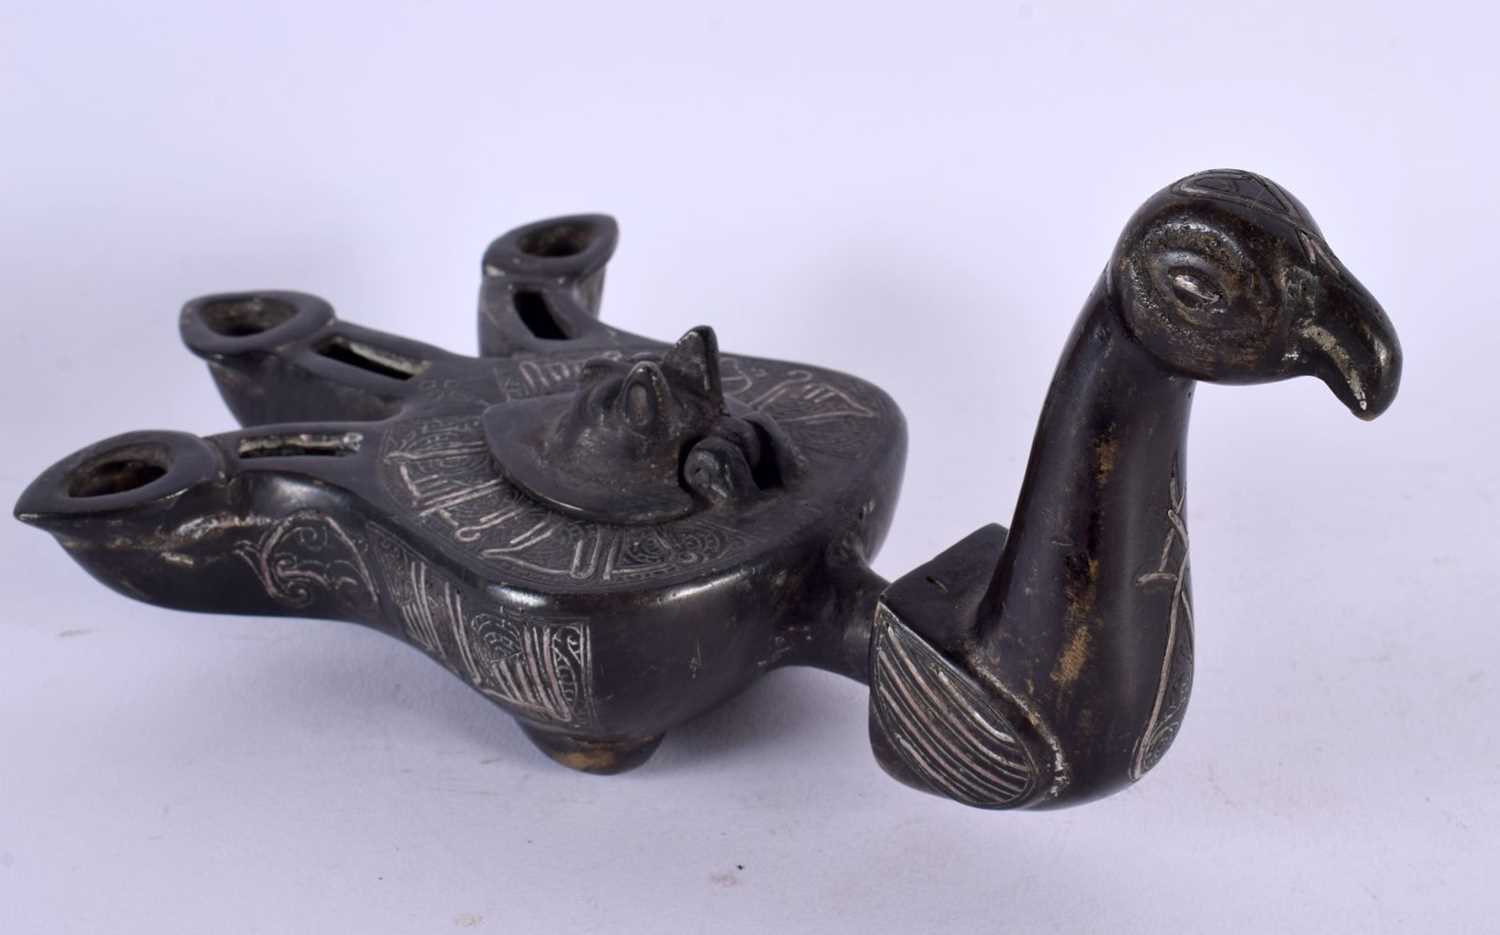 A 19TH CENTURY MIDDLE EASTERN SILVER INLAID BRONZE OIL LAMP formed as a bird, decorated with motifs. - Image 2 of 5